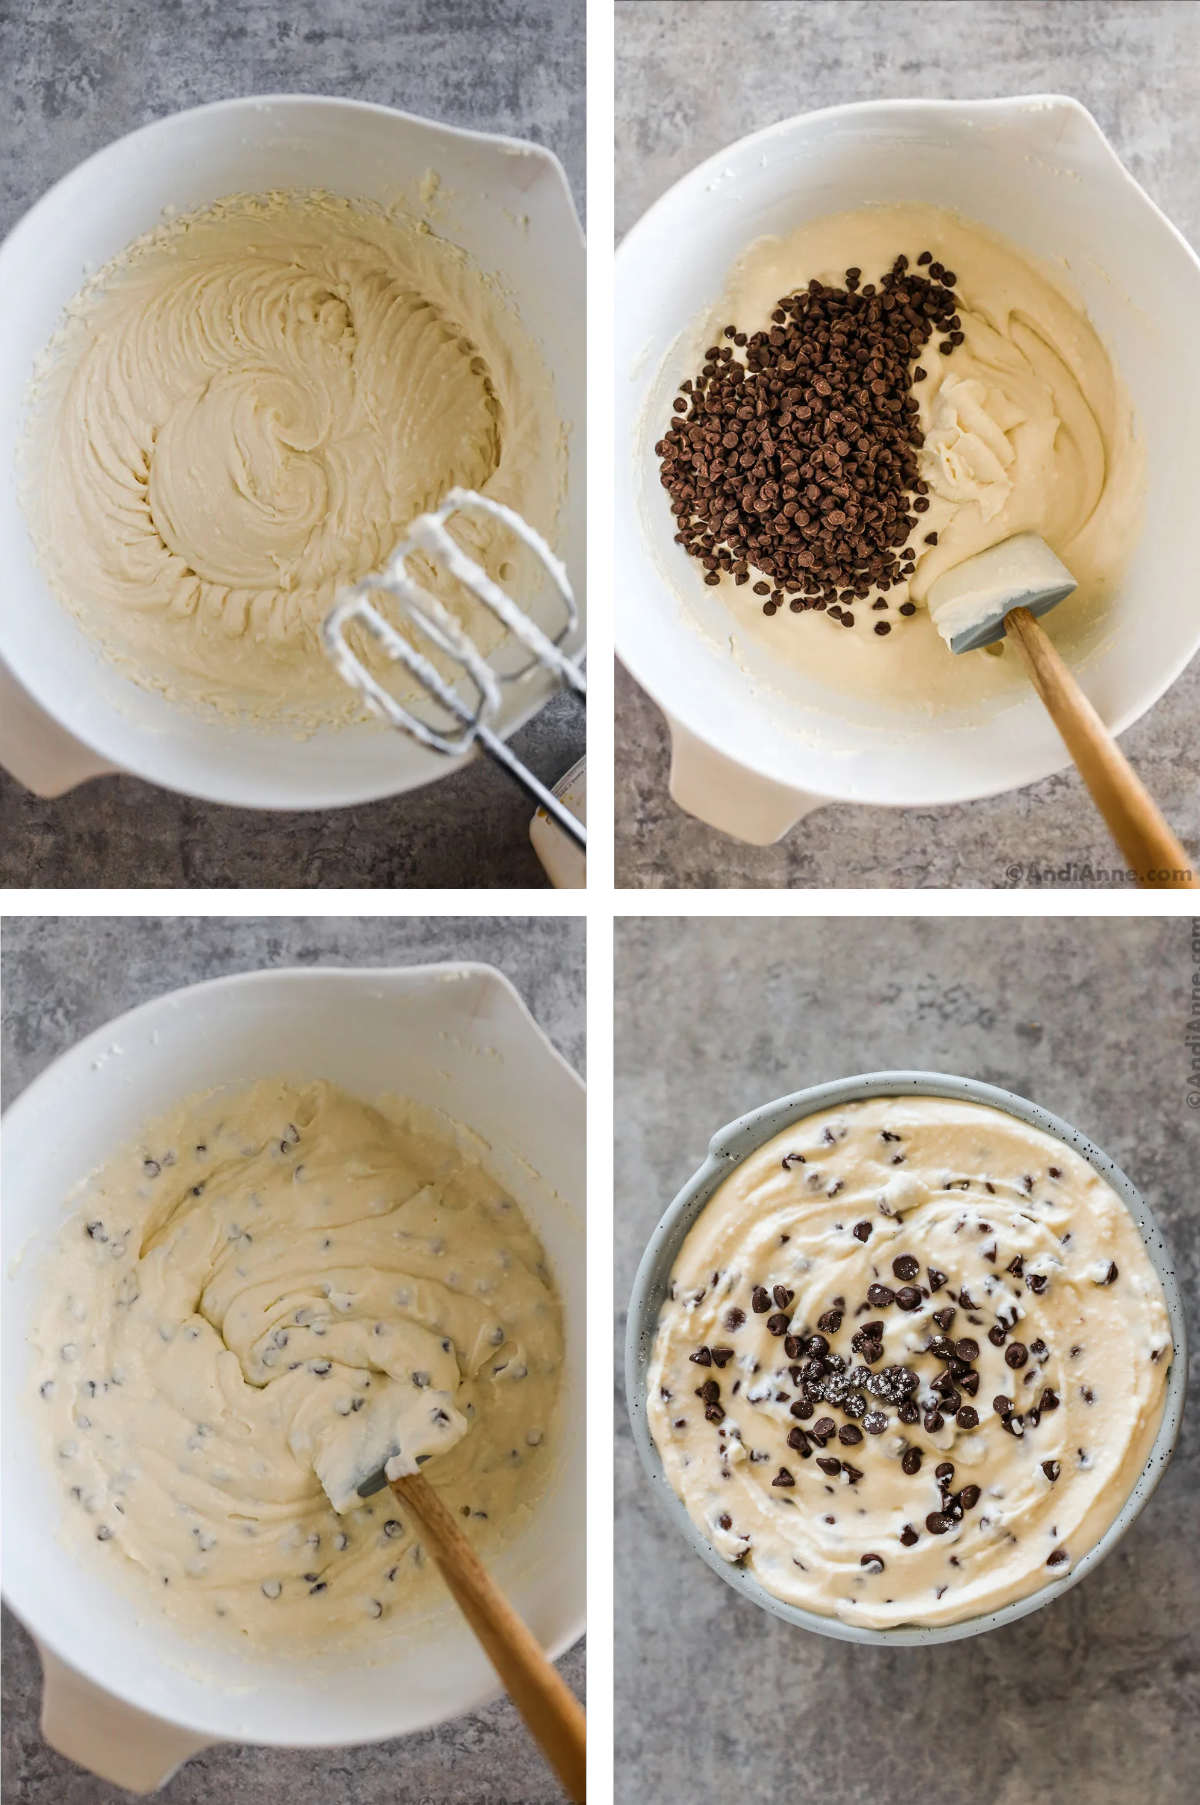 Four images in one. 1. Sugar and Vanilla extract are mixed. 2. Chocolate chips are added to the mixture. 3. Chocolate chips are mixed in. 4. The final Cannoli recipe is served in a blue bowl. 